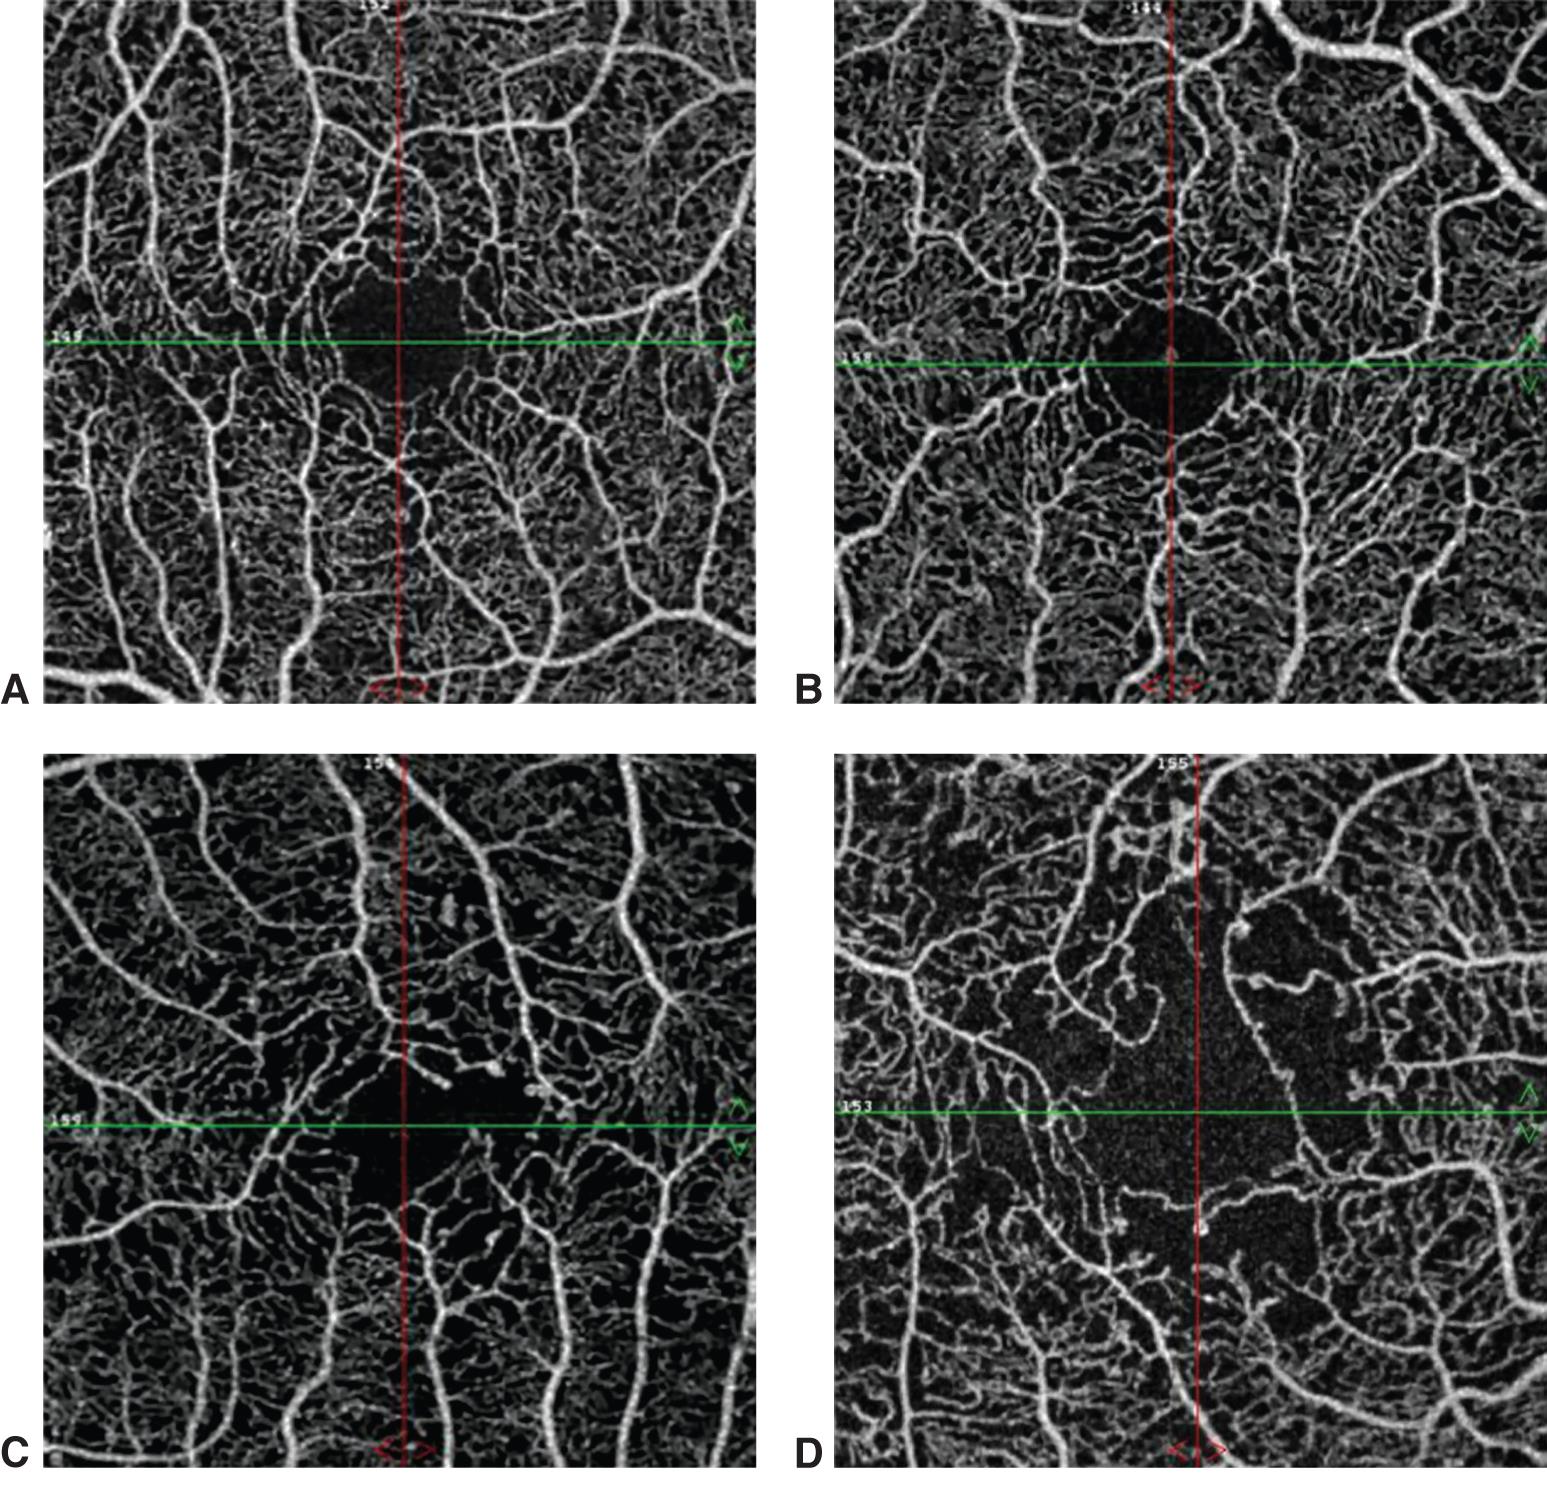 OCTA and diabetic retinopathy severity - American Academy of Ophthalmology